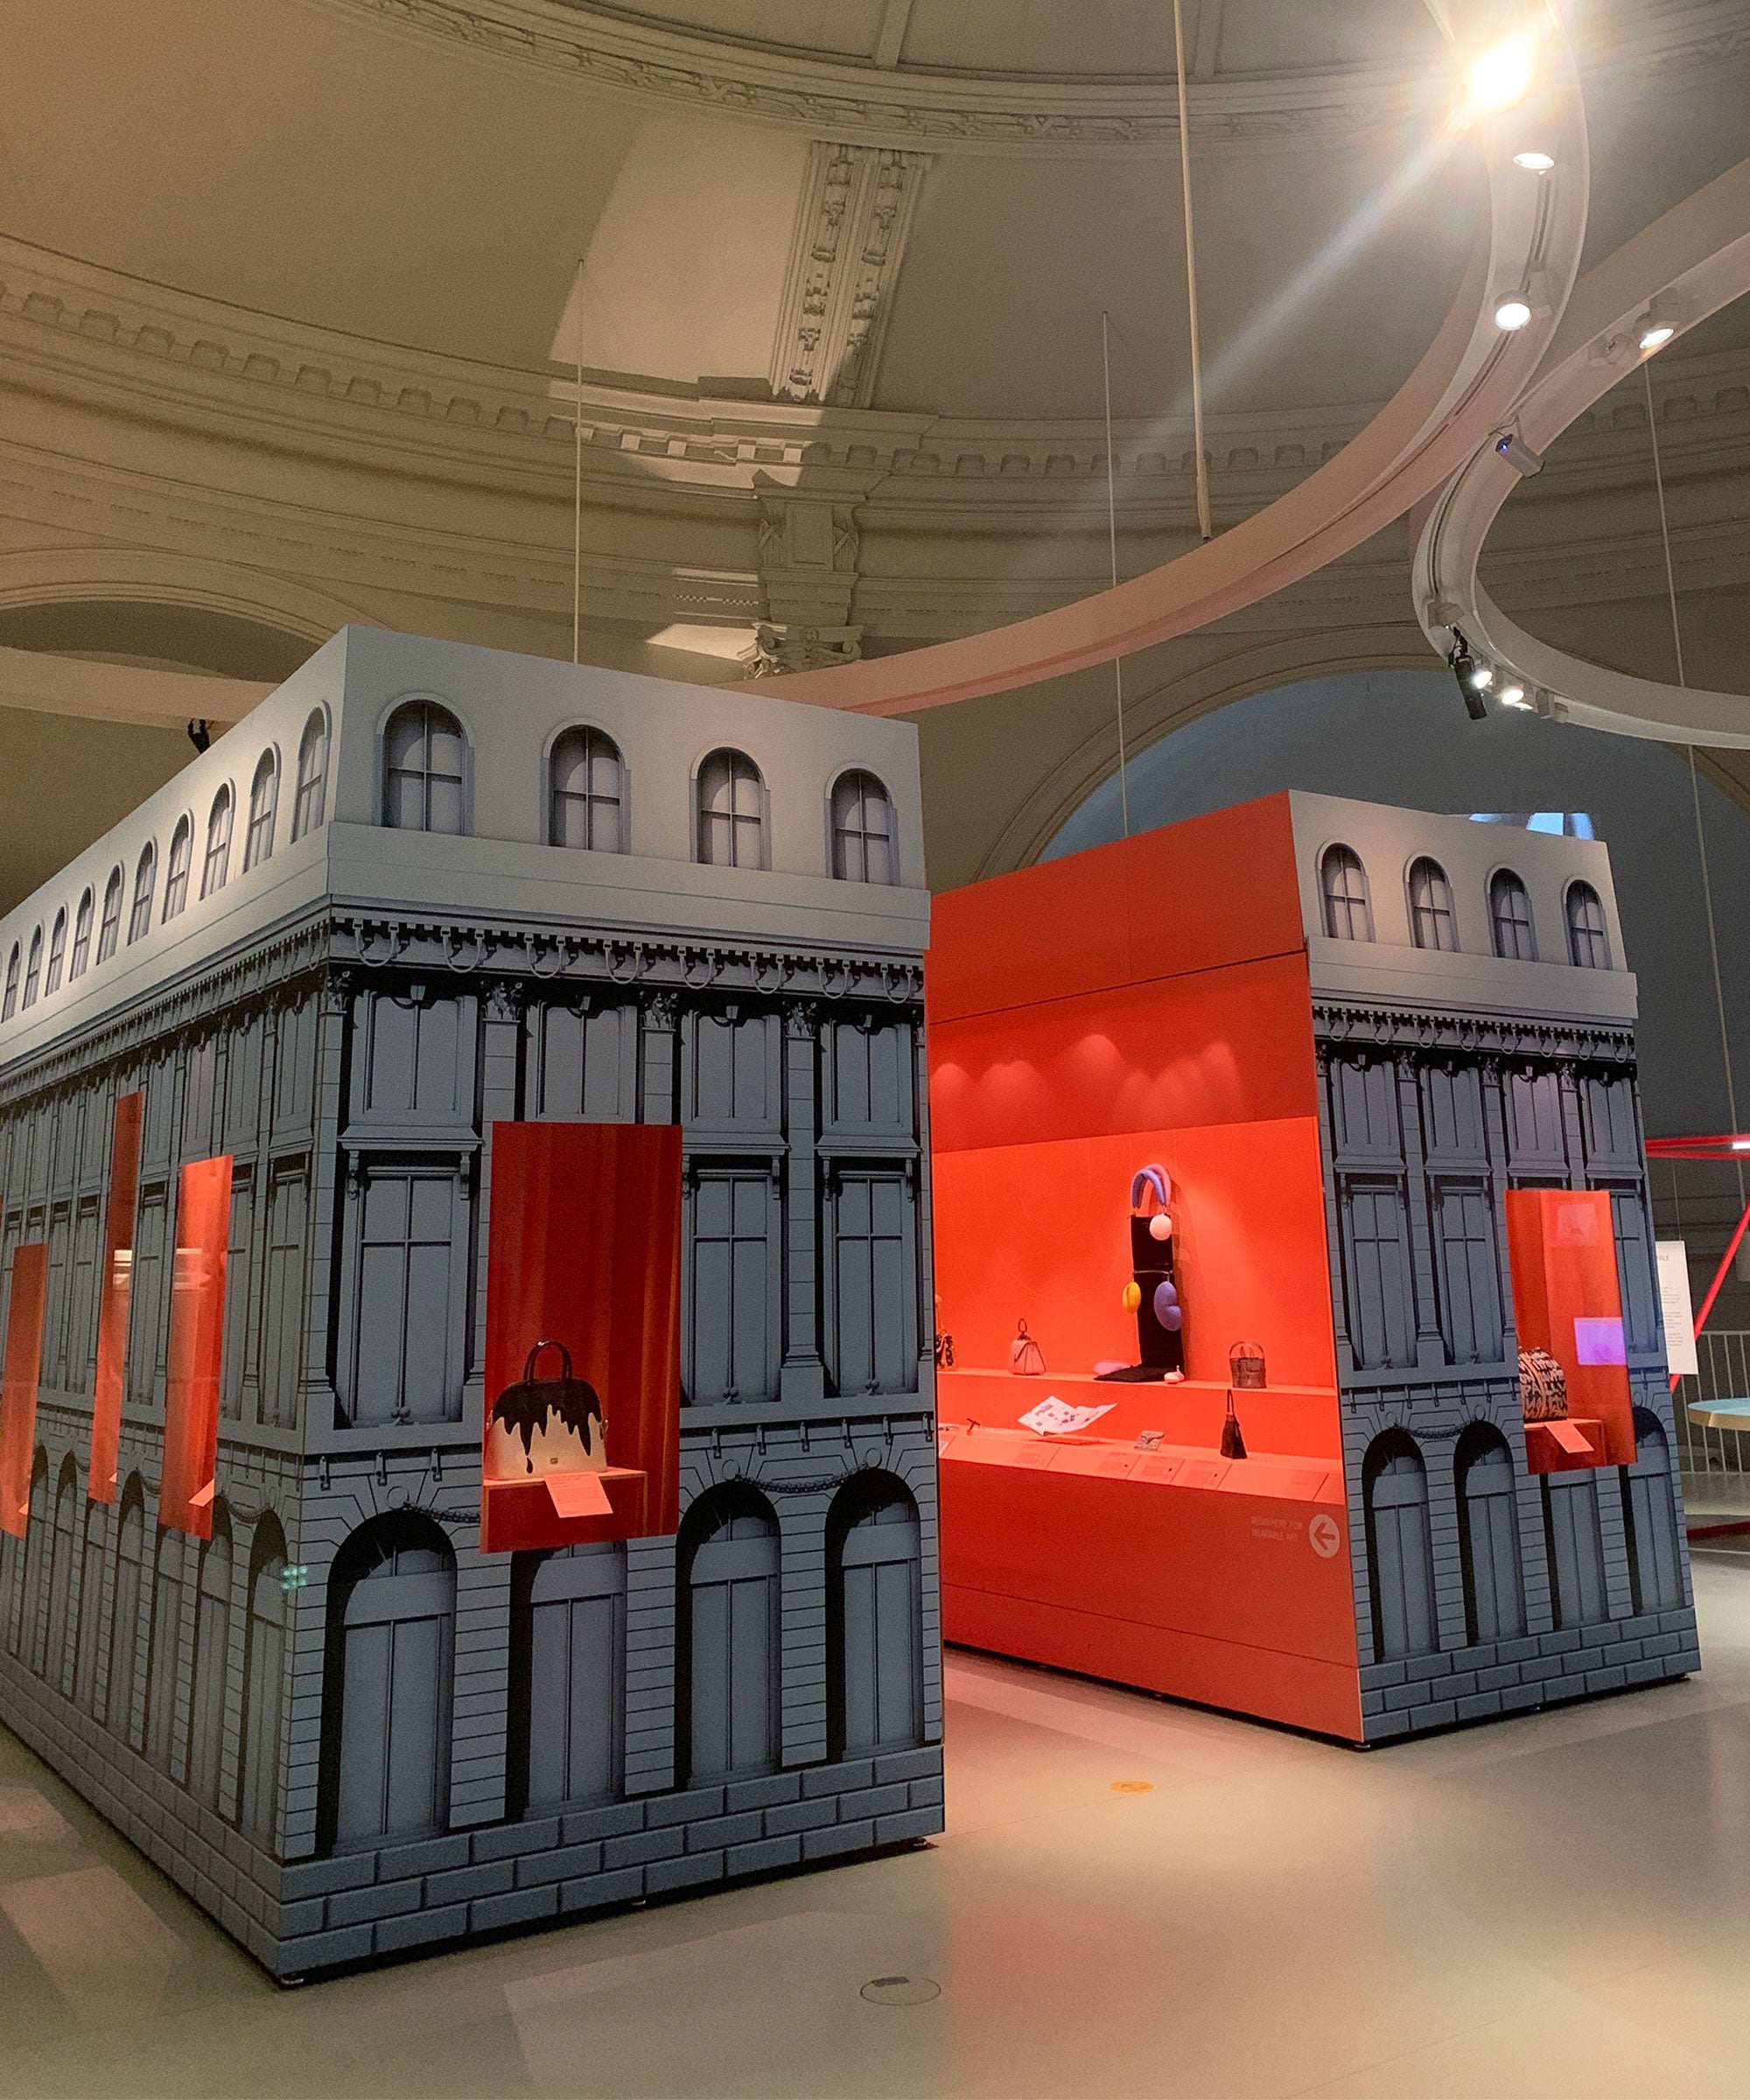 Inside the Bags: Inside Out exhibition · V&A